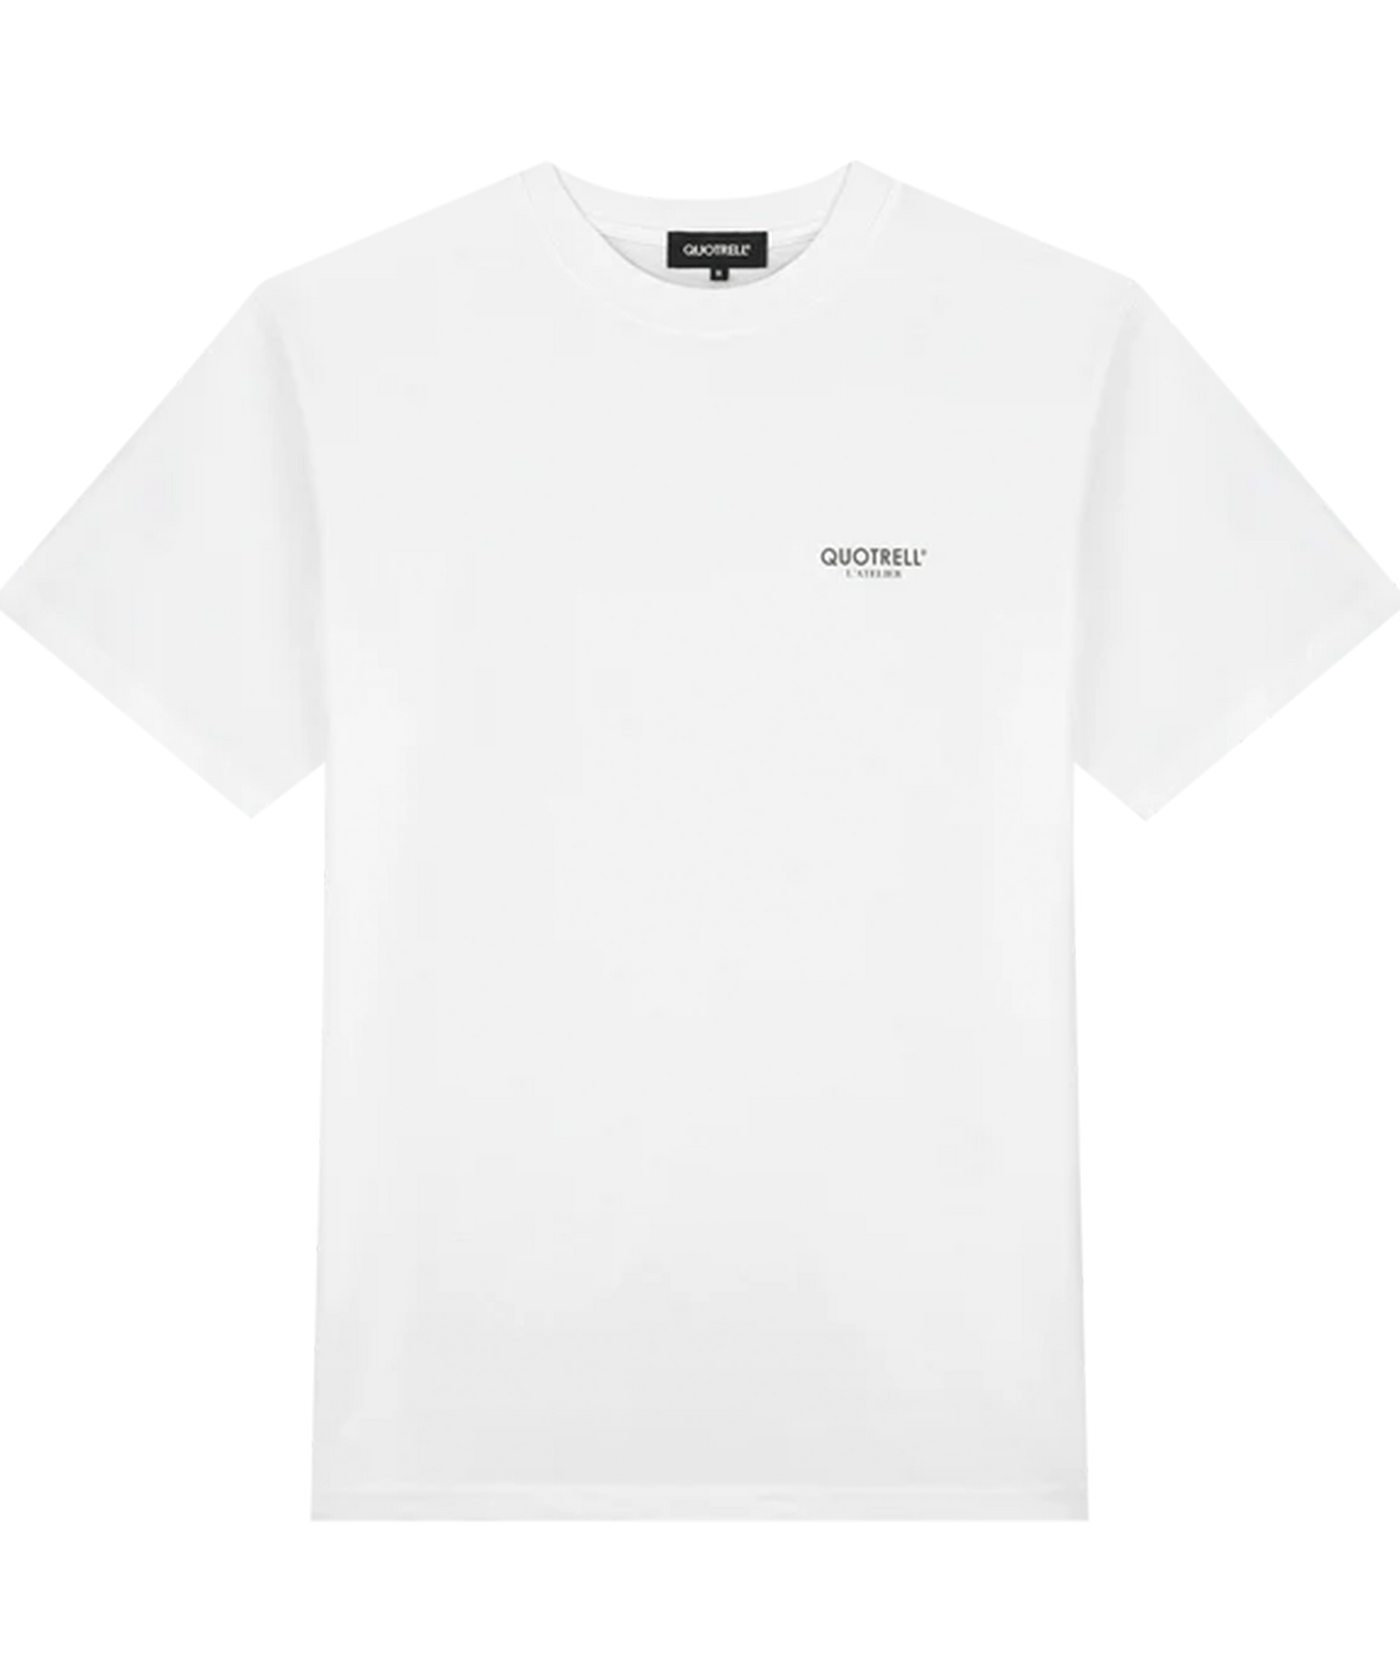 Quotrell - L' Atelier - T-shirt - White/army